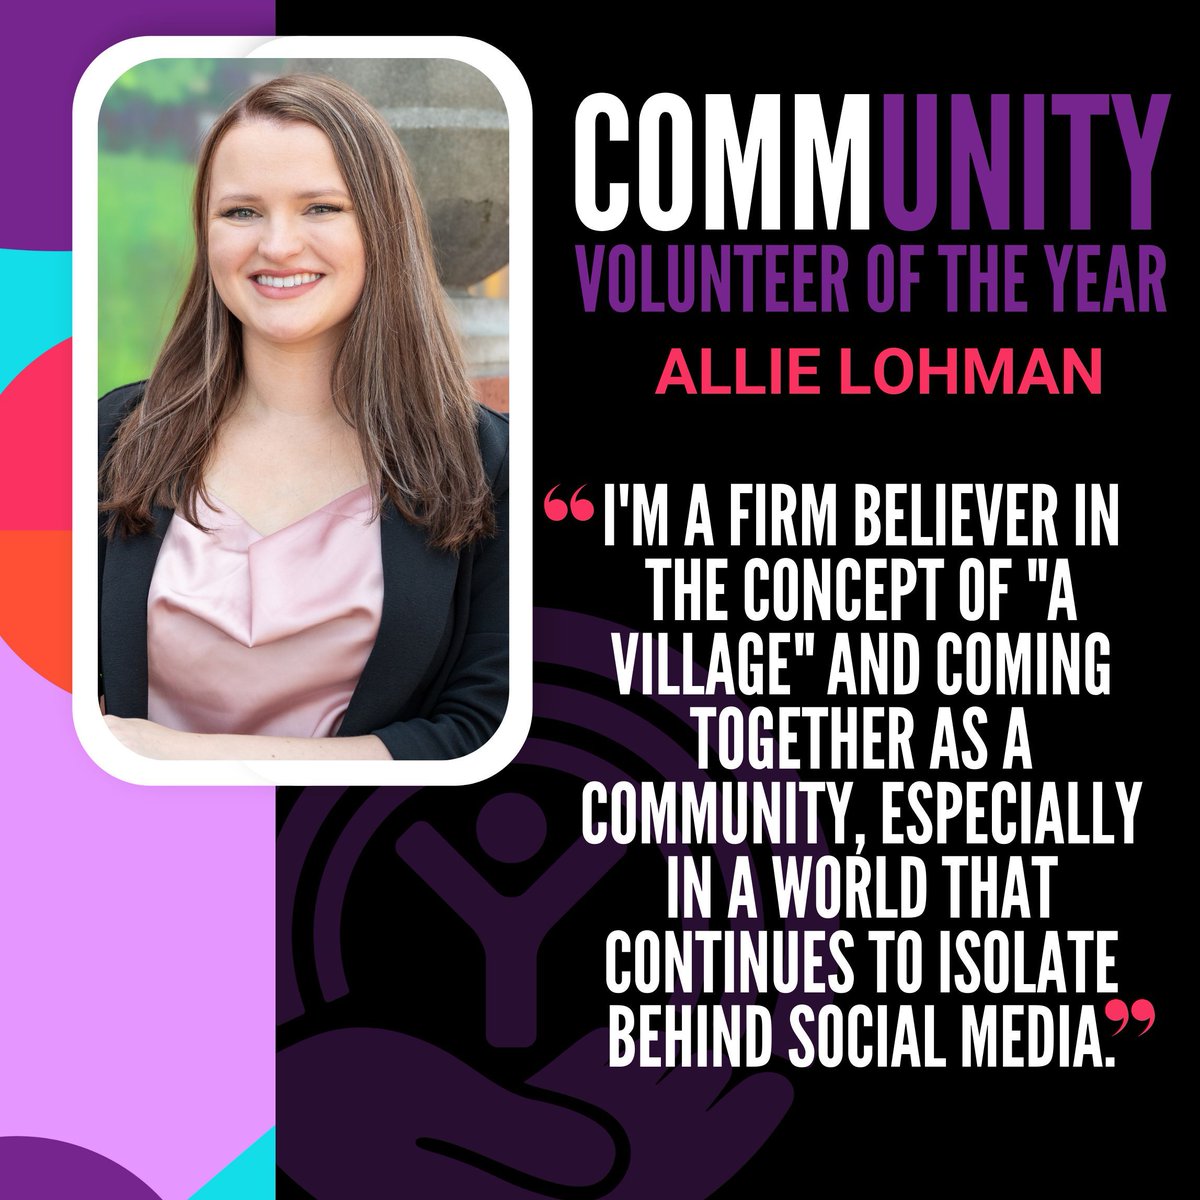 Help us celebrate our round 3 of Community Volunteers of the year! Thank you to the following individuals making a difference in the Kansas City community: Kisa L. Caruthers, Ray Christensen, Rick Kahle & Allie Lohman! #KansasCity #Volunteer #Waymakers